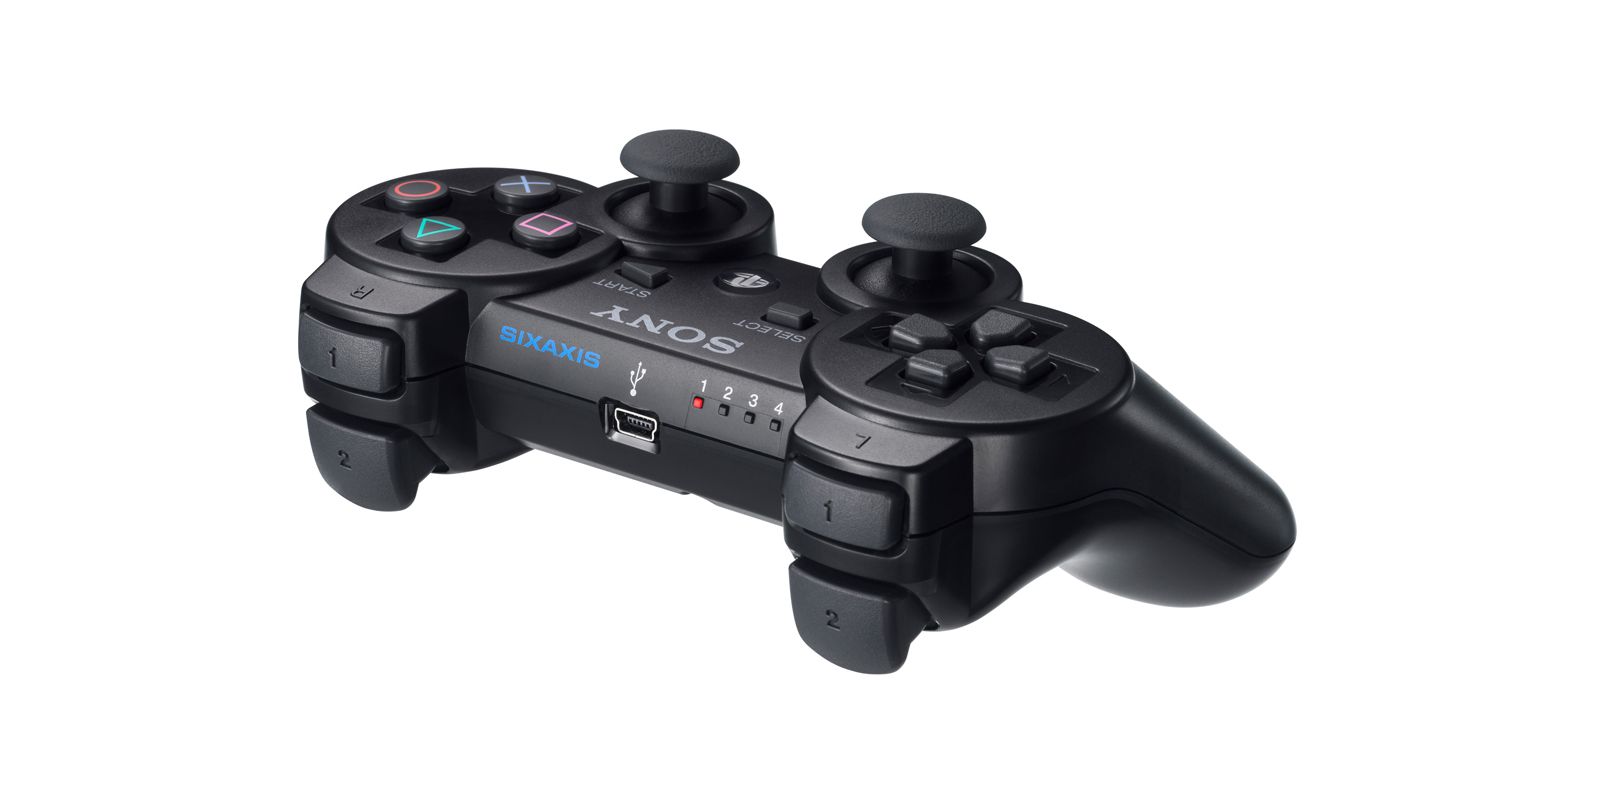 Playstation-SixAxis-controller